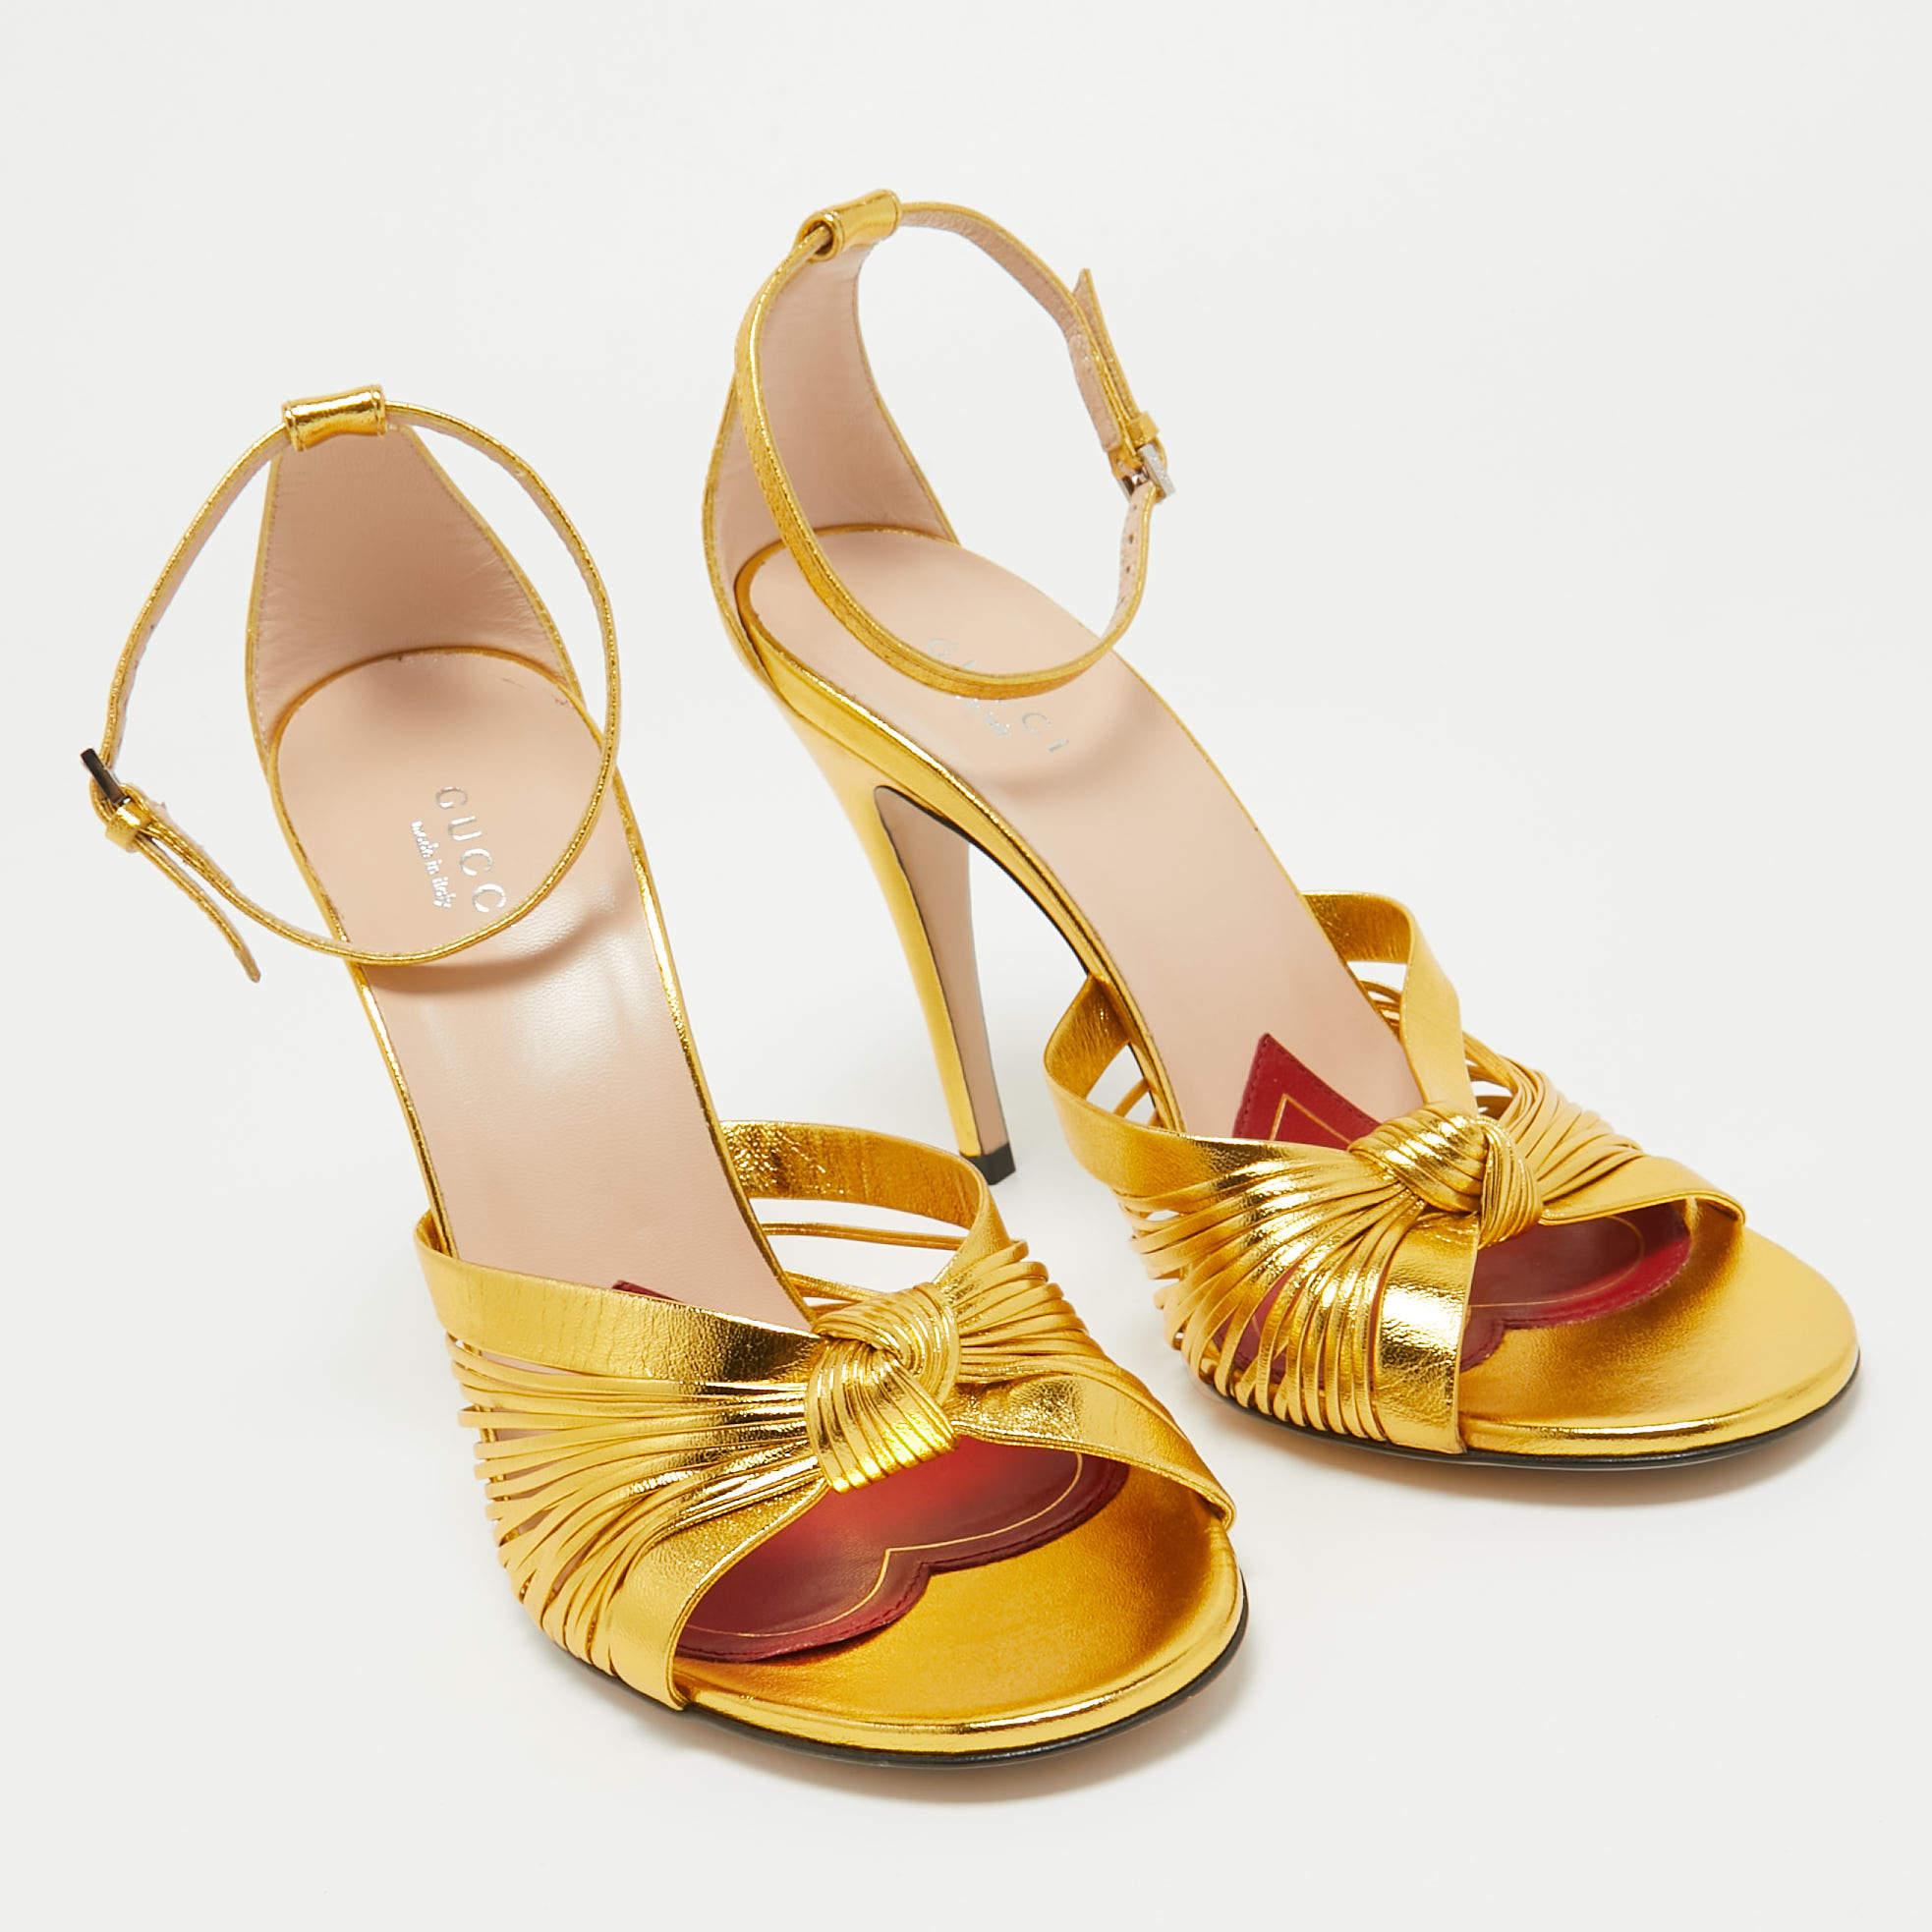 Gucci Metallic Gold Leather Allie Ankle Strap Sandals Size 38.5 1